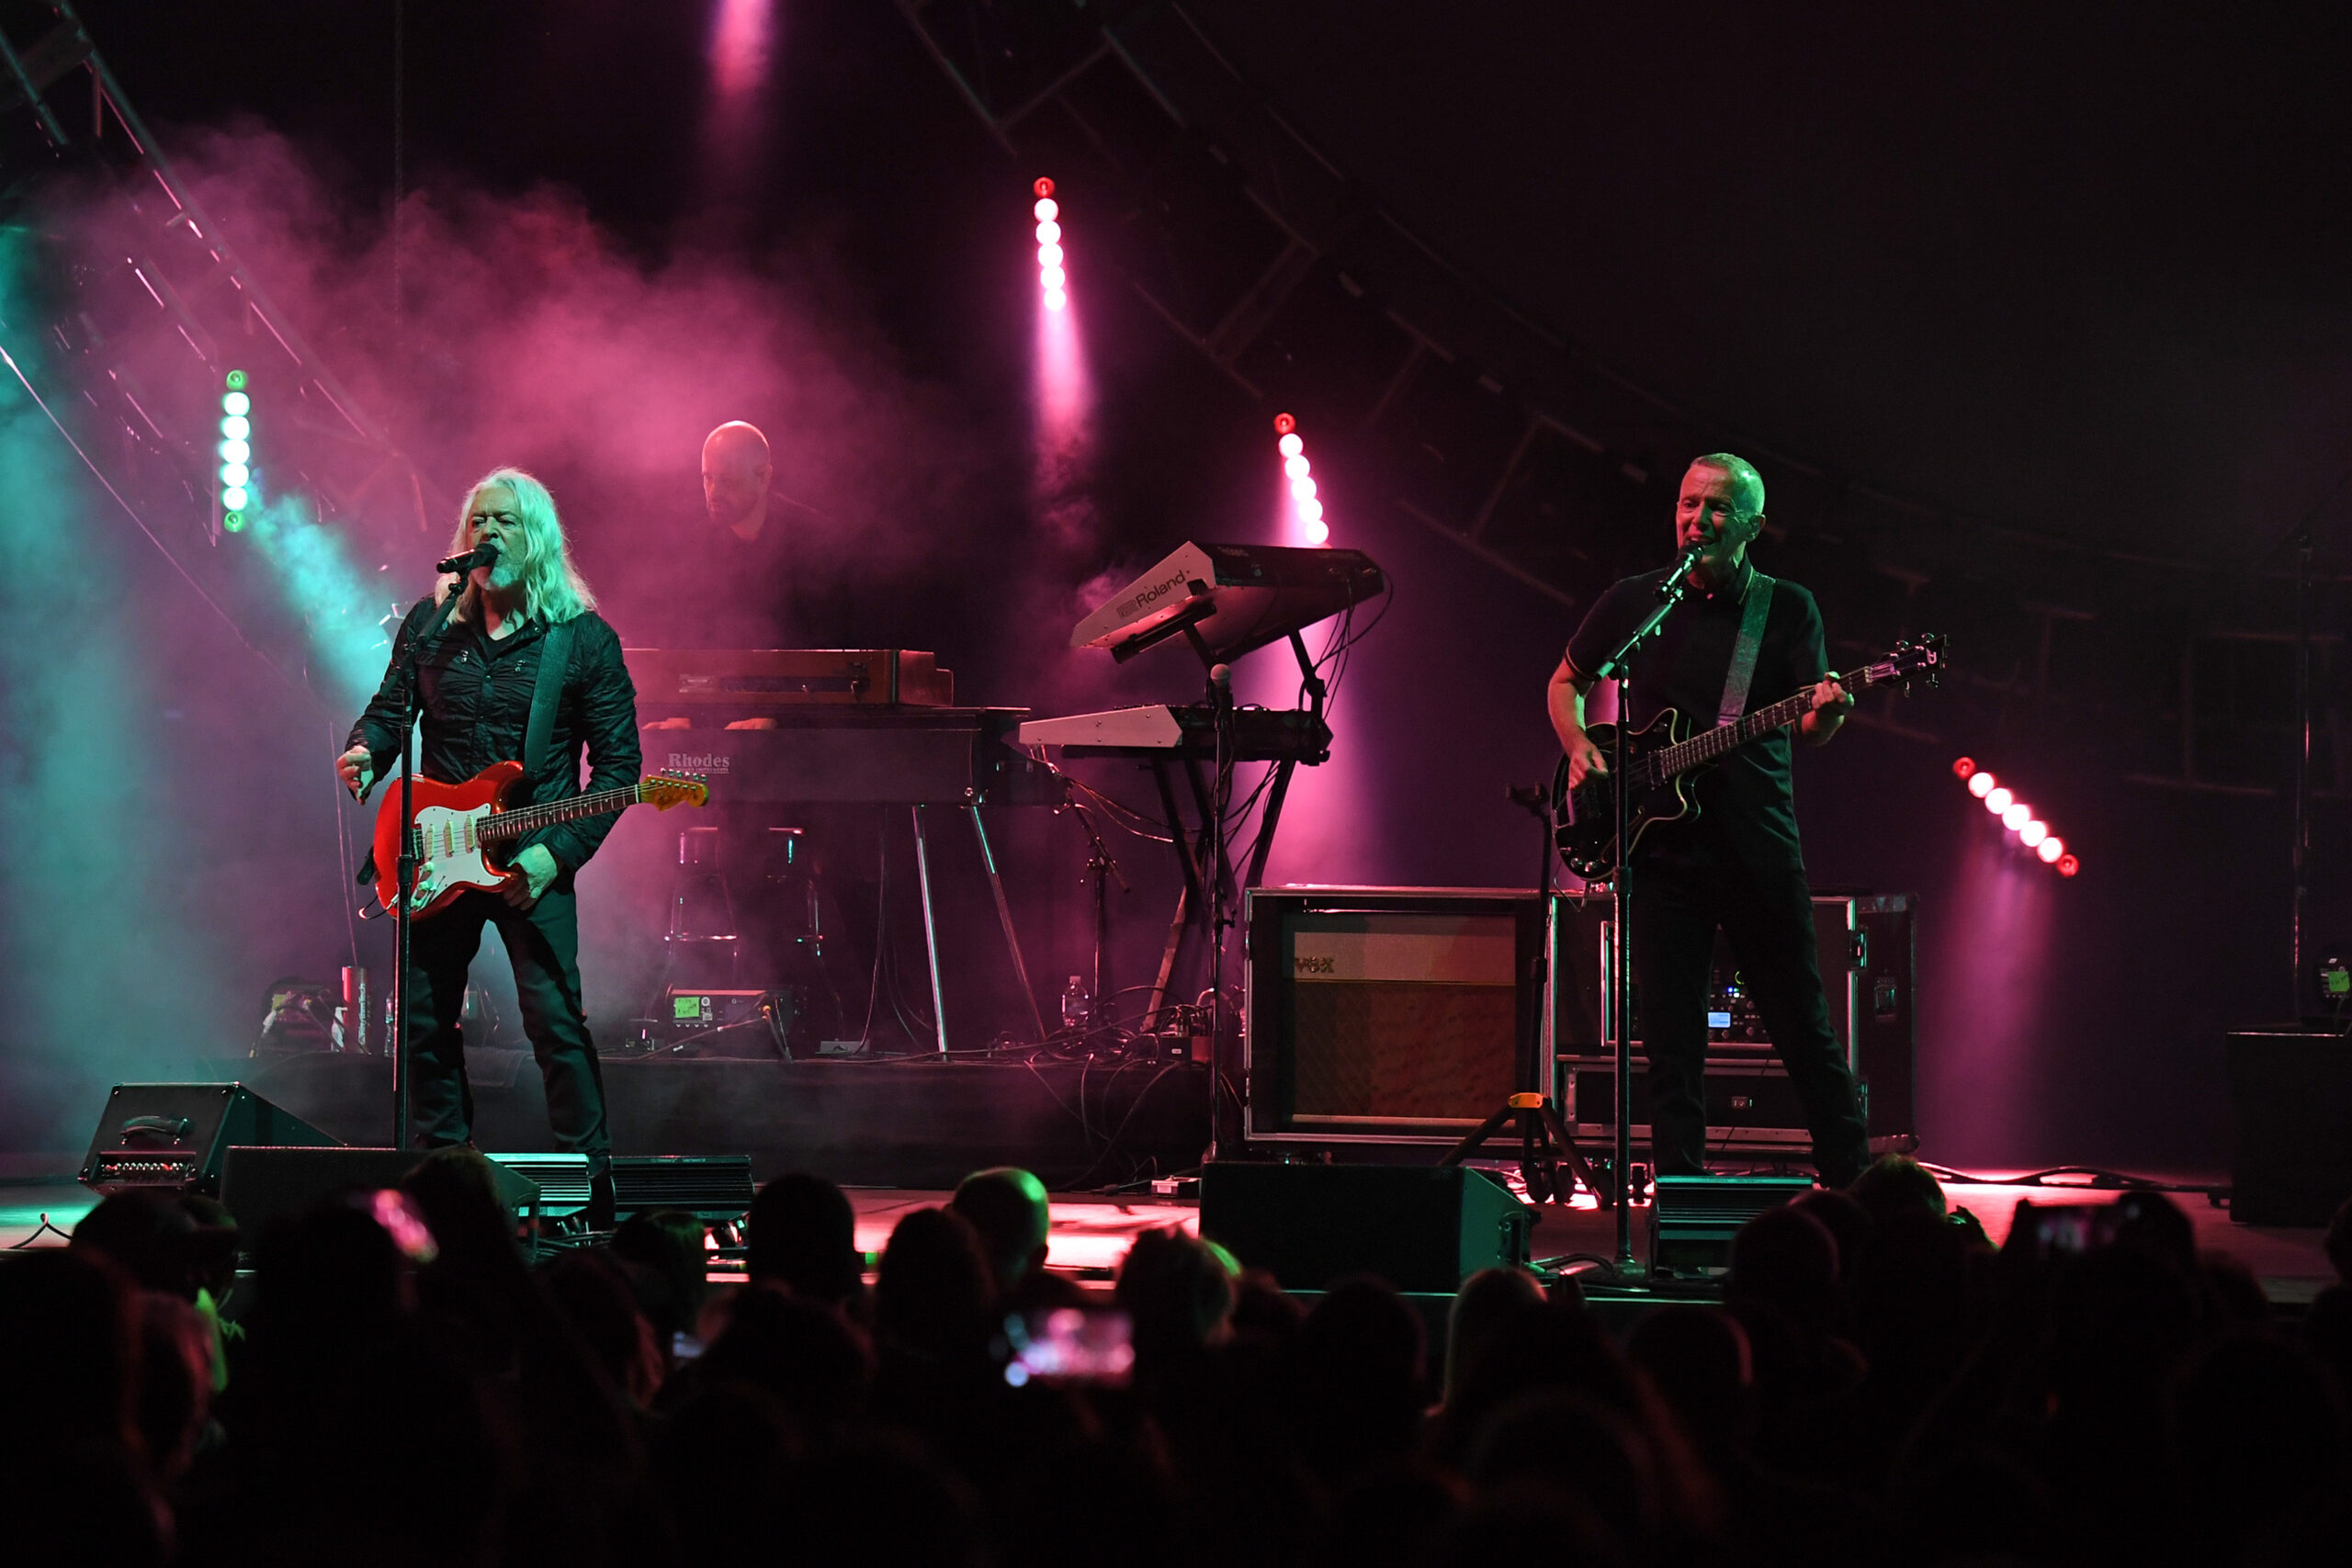 Concert Review Tears For Fears & Garbage West Palm Beach, FL June